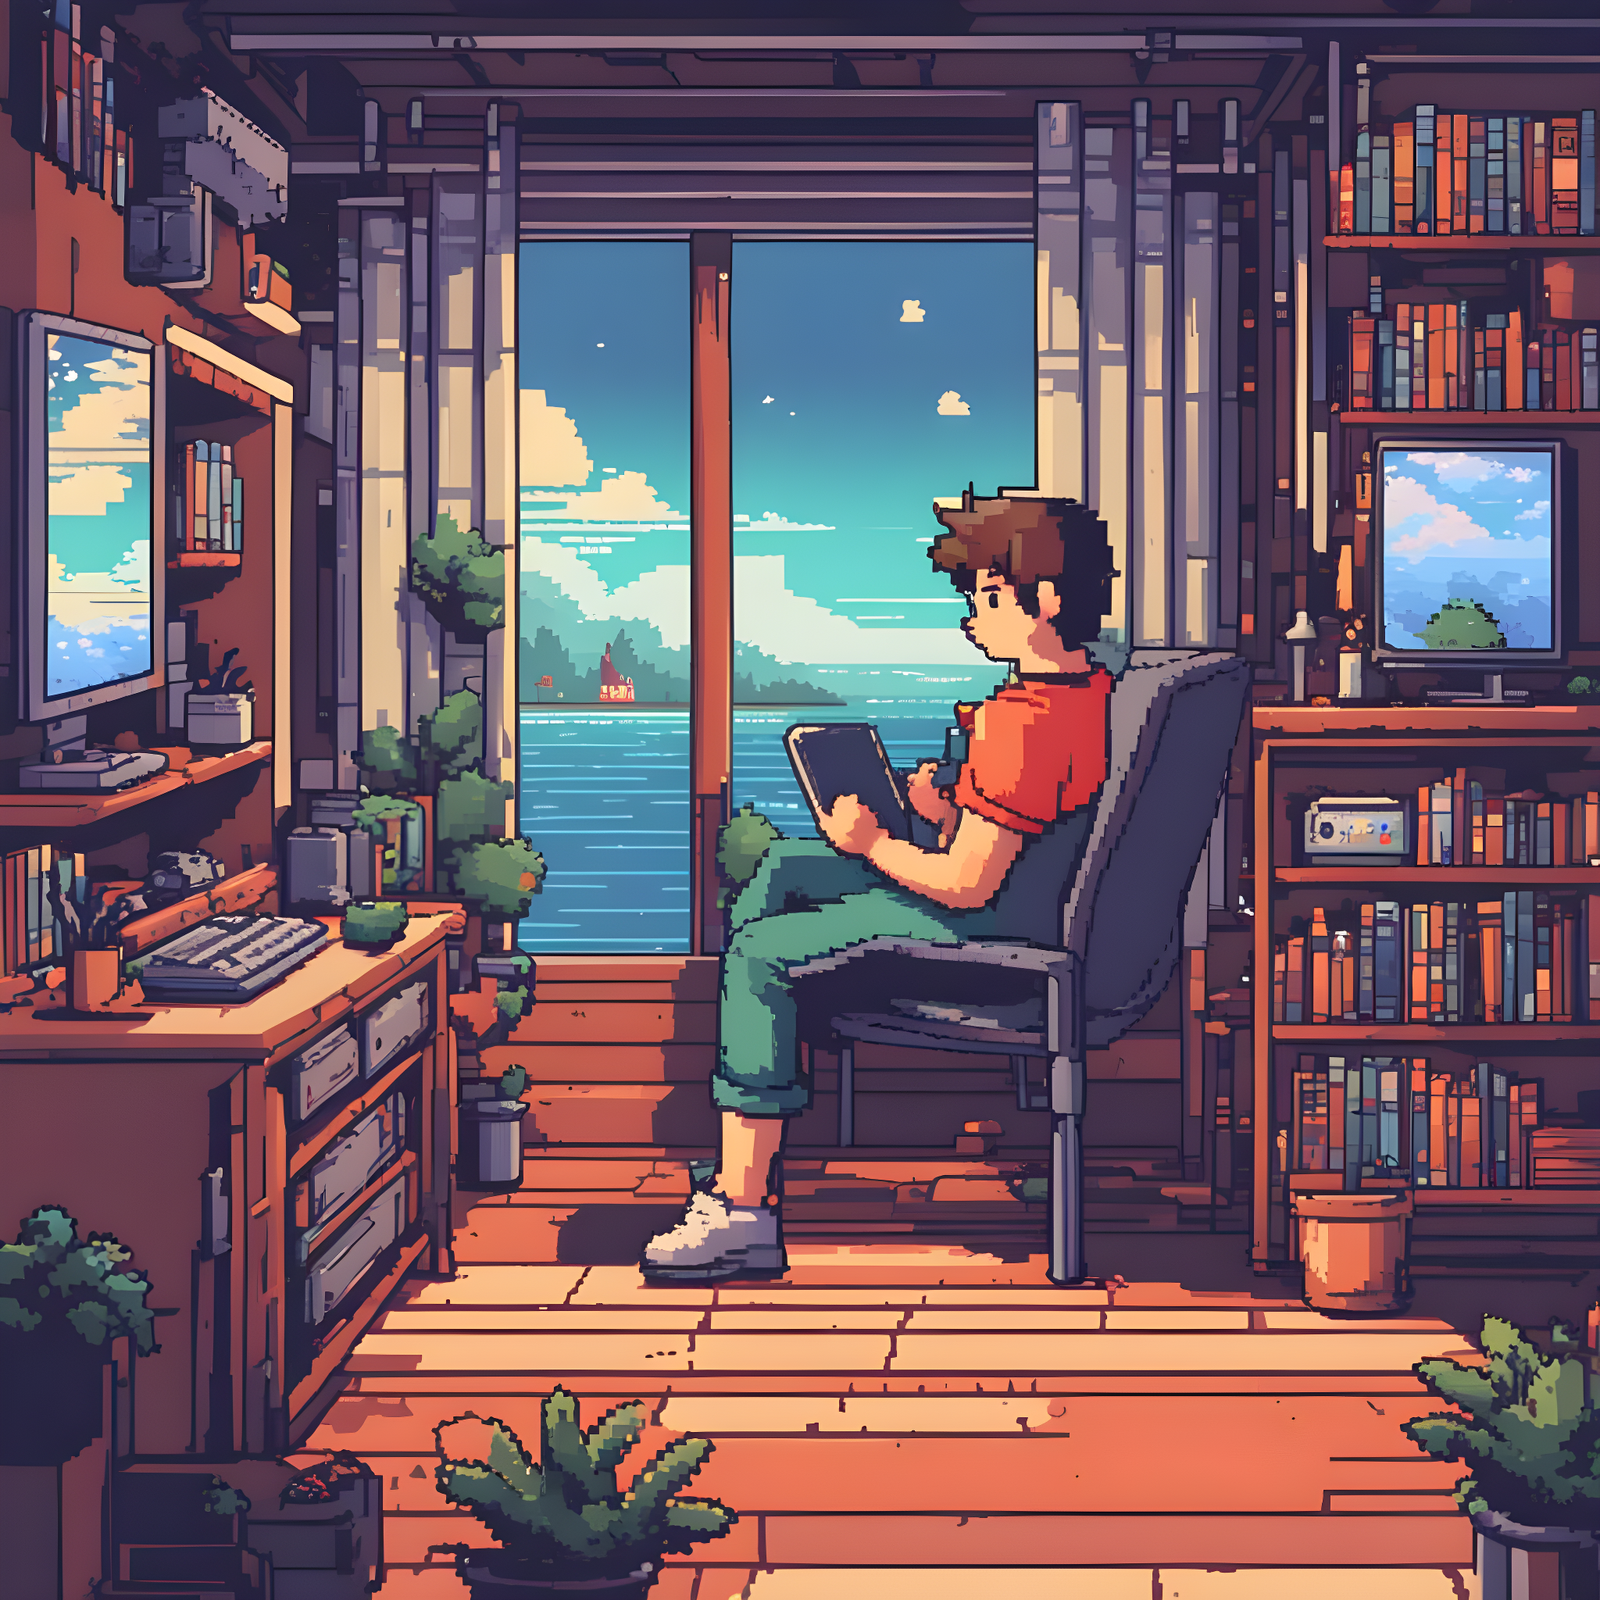 A pixel art character sitting in a cozy room, surrounded by modern gadgets and screens. They've pushed away their computer, turned off their smartphone, and unplugged from the digital world. Instead, they're reclining in a comfortable chair, a book in hand, basking in the warm glow of a soft lamp. A cup of tea sits on a nearby table, and a peaceful smile graces their face. This pixel art captures the essence of "self-care practices" by highlighting the importance of unplugging and enjoying a serene moment of technology-free relaxation.